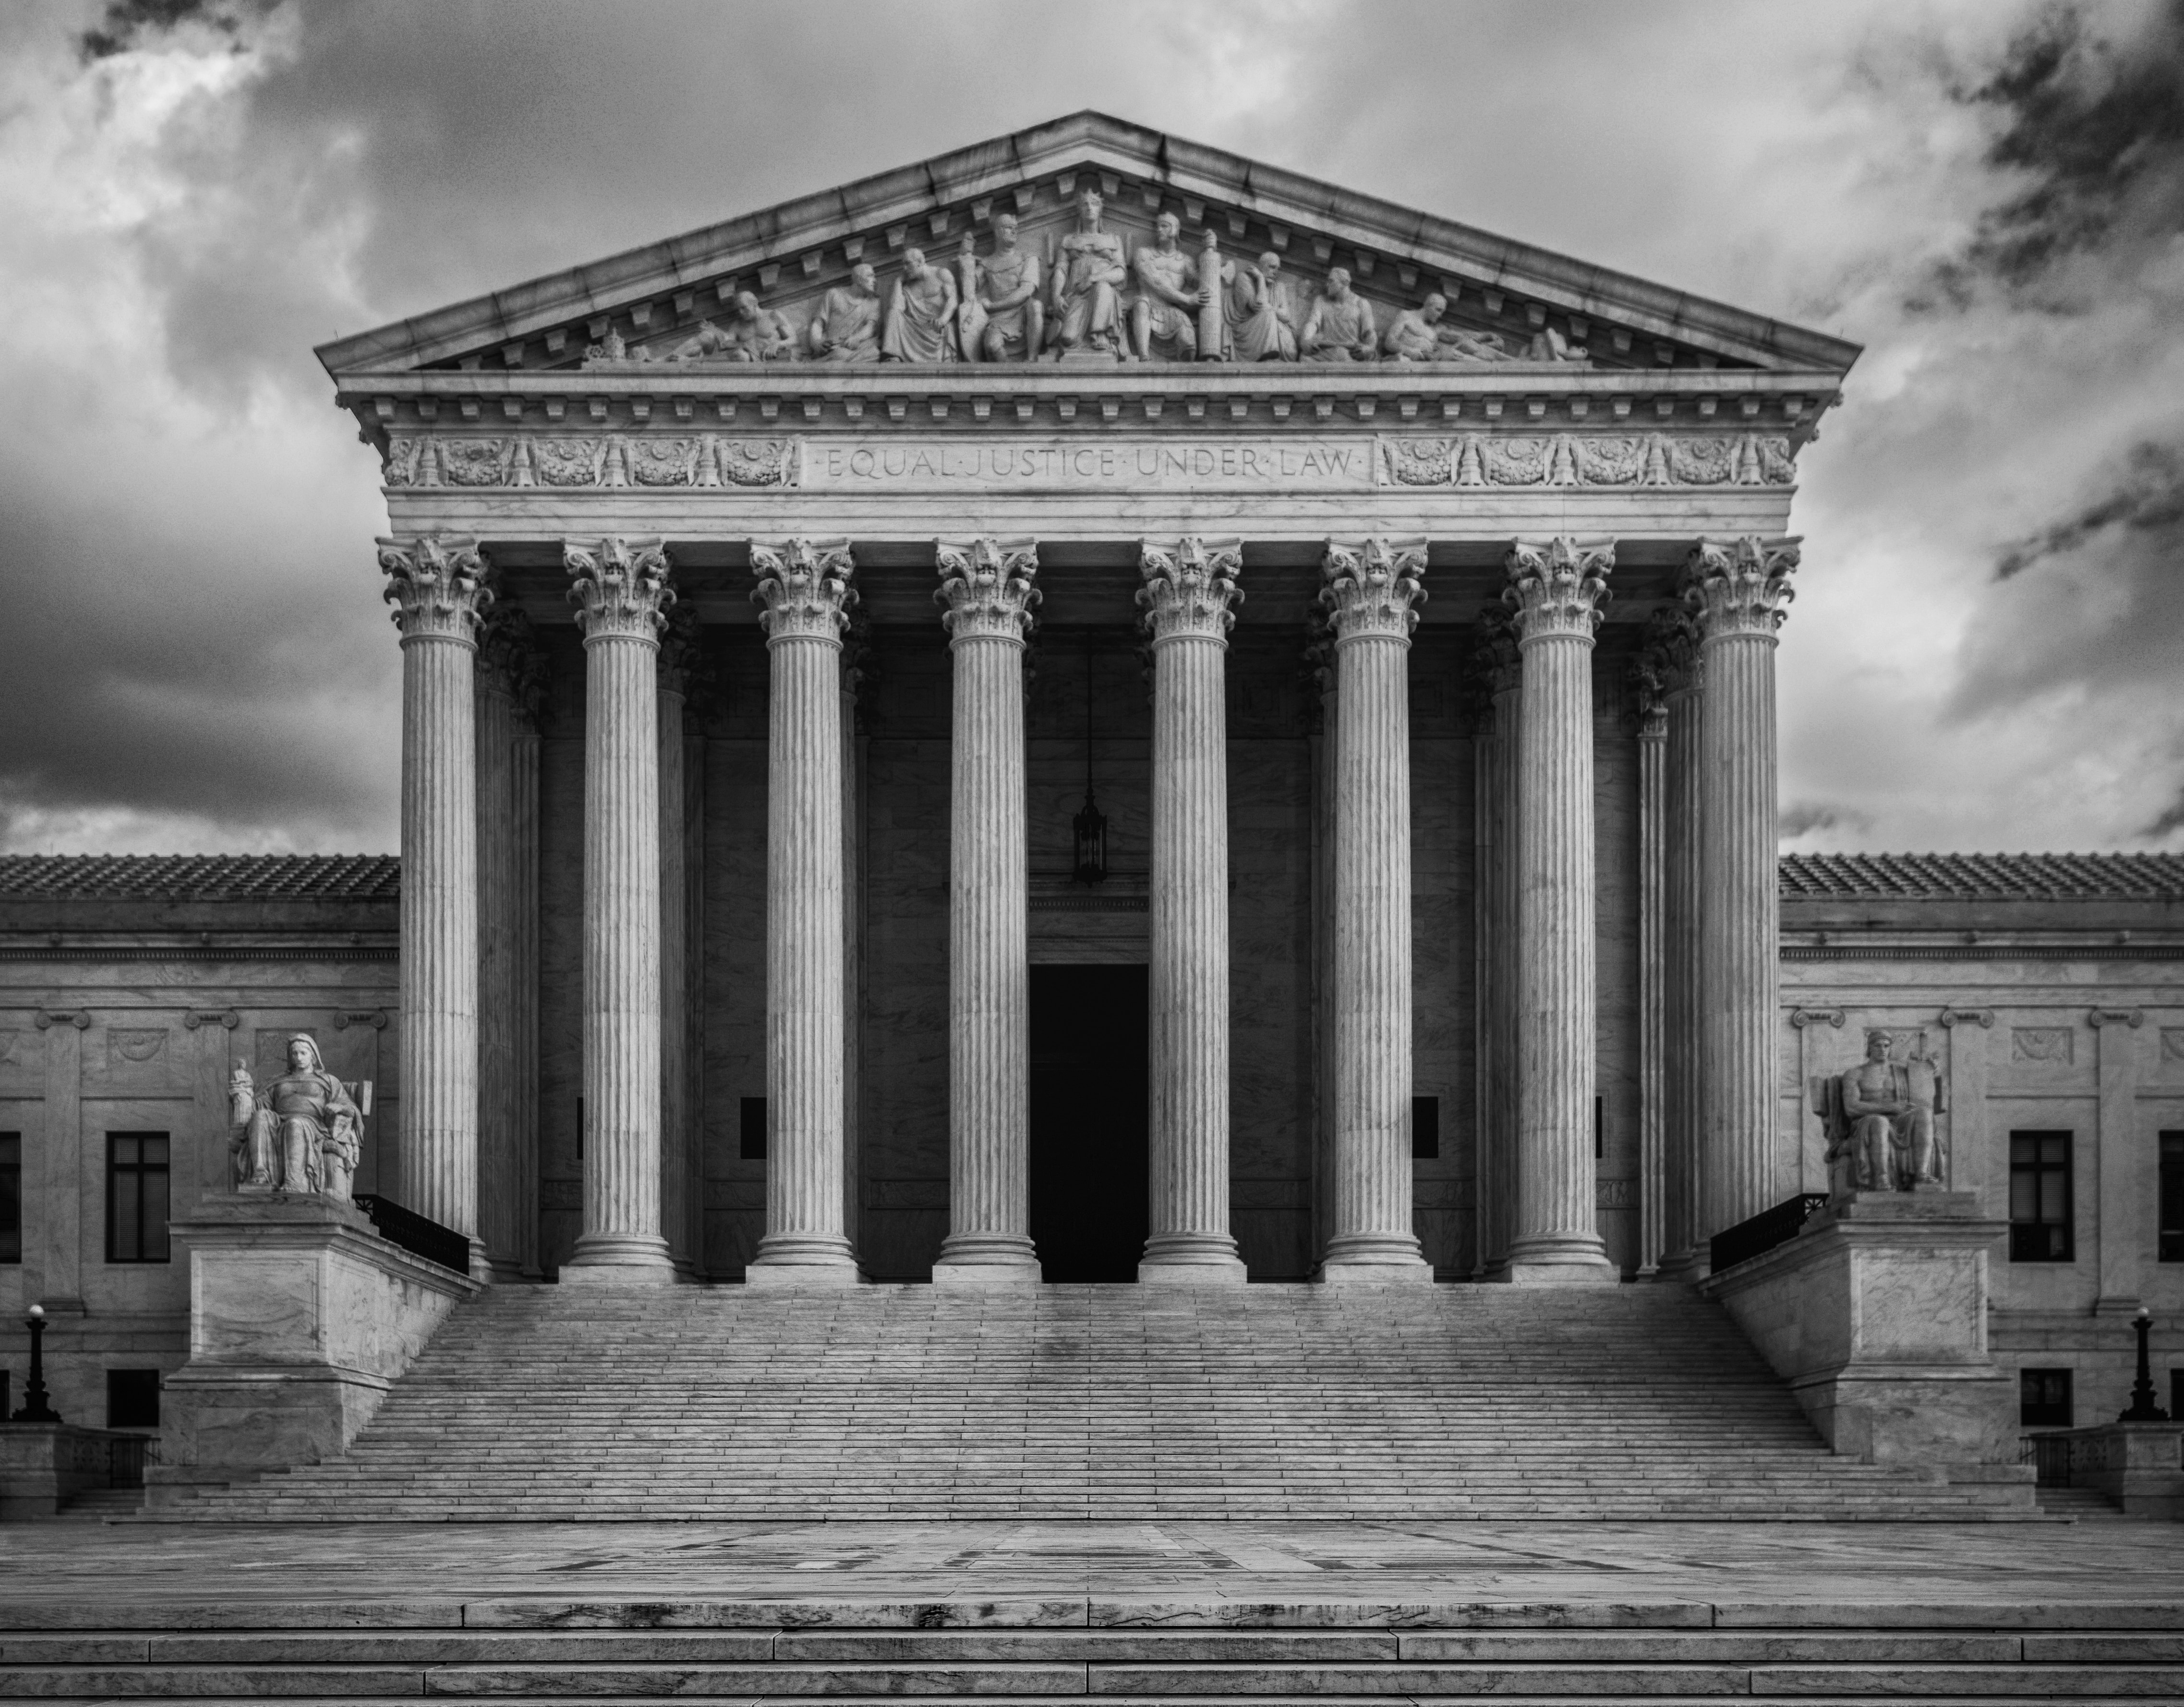 Photo of the U.S. Supreme Court with dark clouds